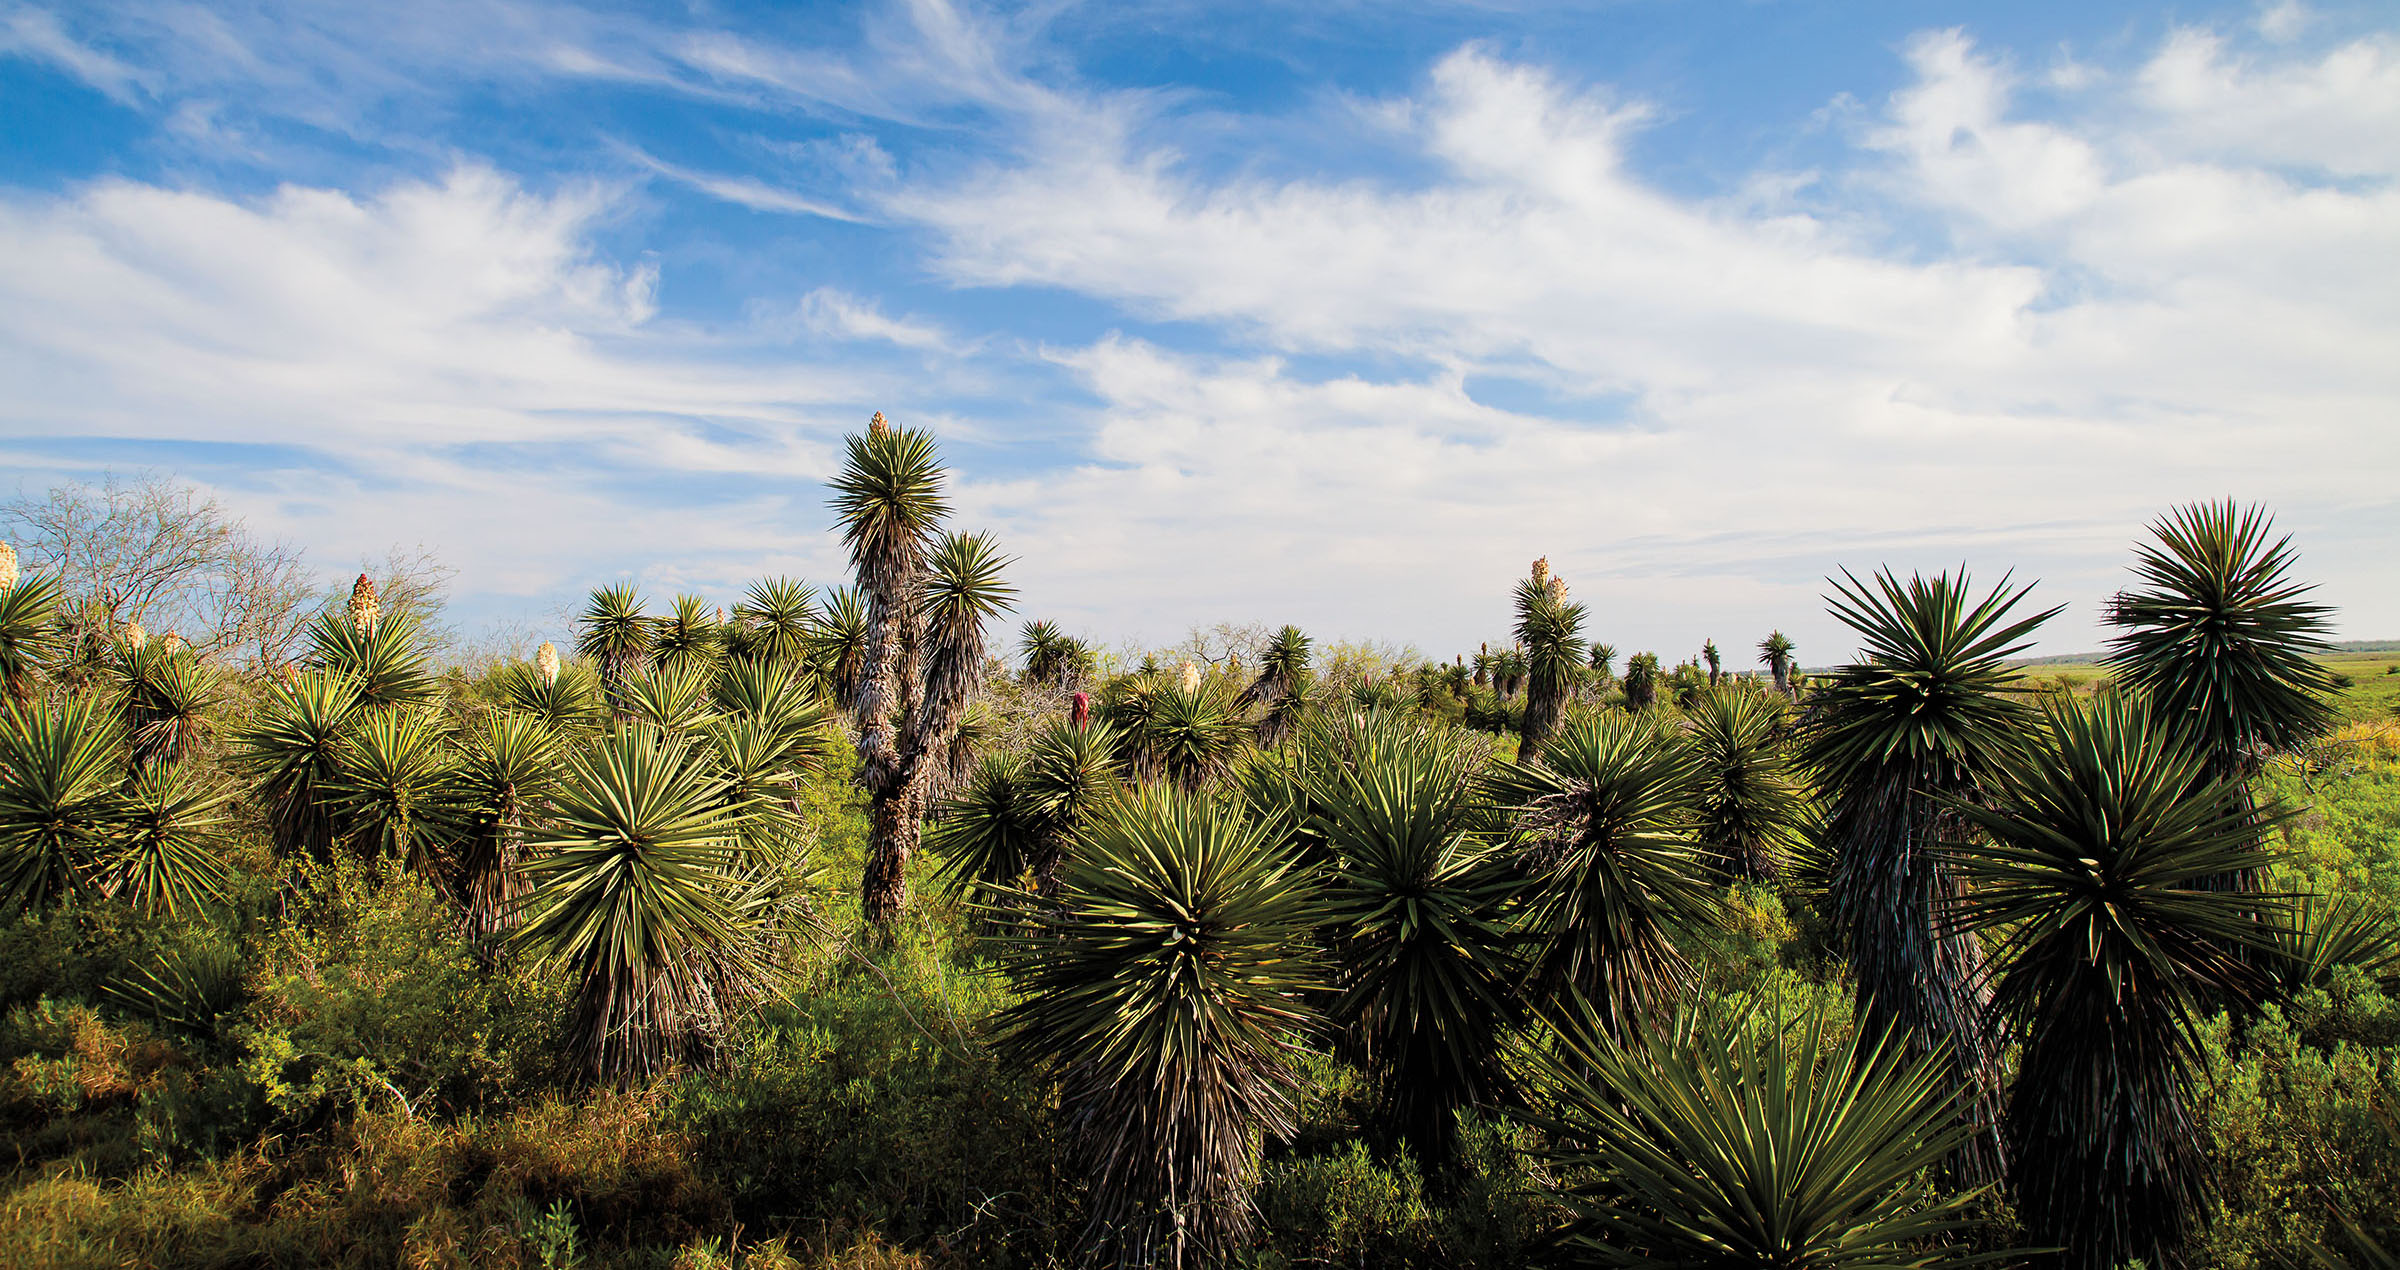 A blue sky above a field of green, spiky yucca